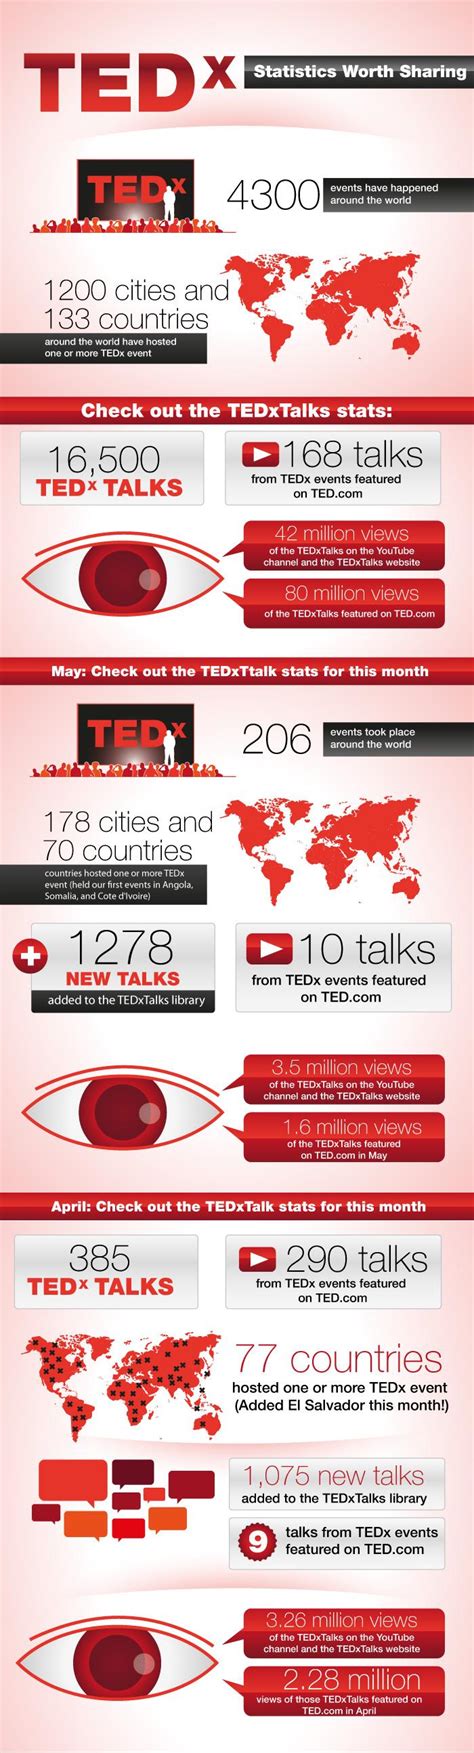 Heres Why Ted And Tedx Are So Incredibly Appealing Infographic